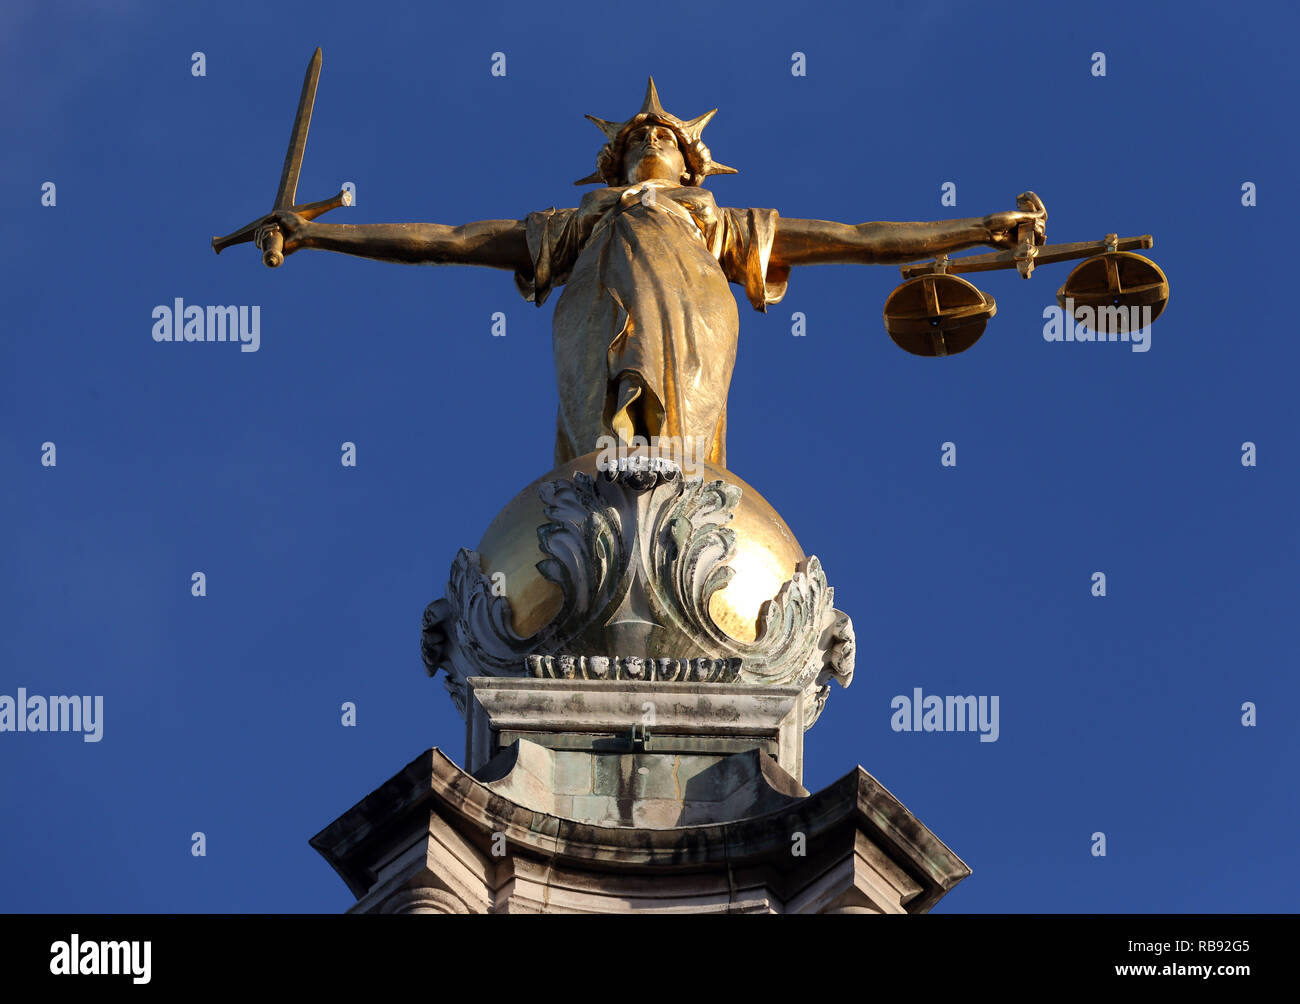 FW Pomeroy's Statue of Justice stands atop the Central Criminal Court building, Old Bailey, London. Stock Photo